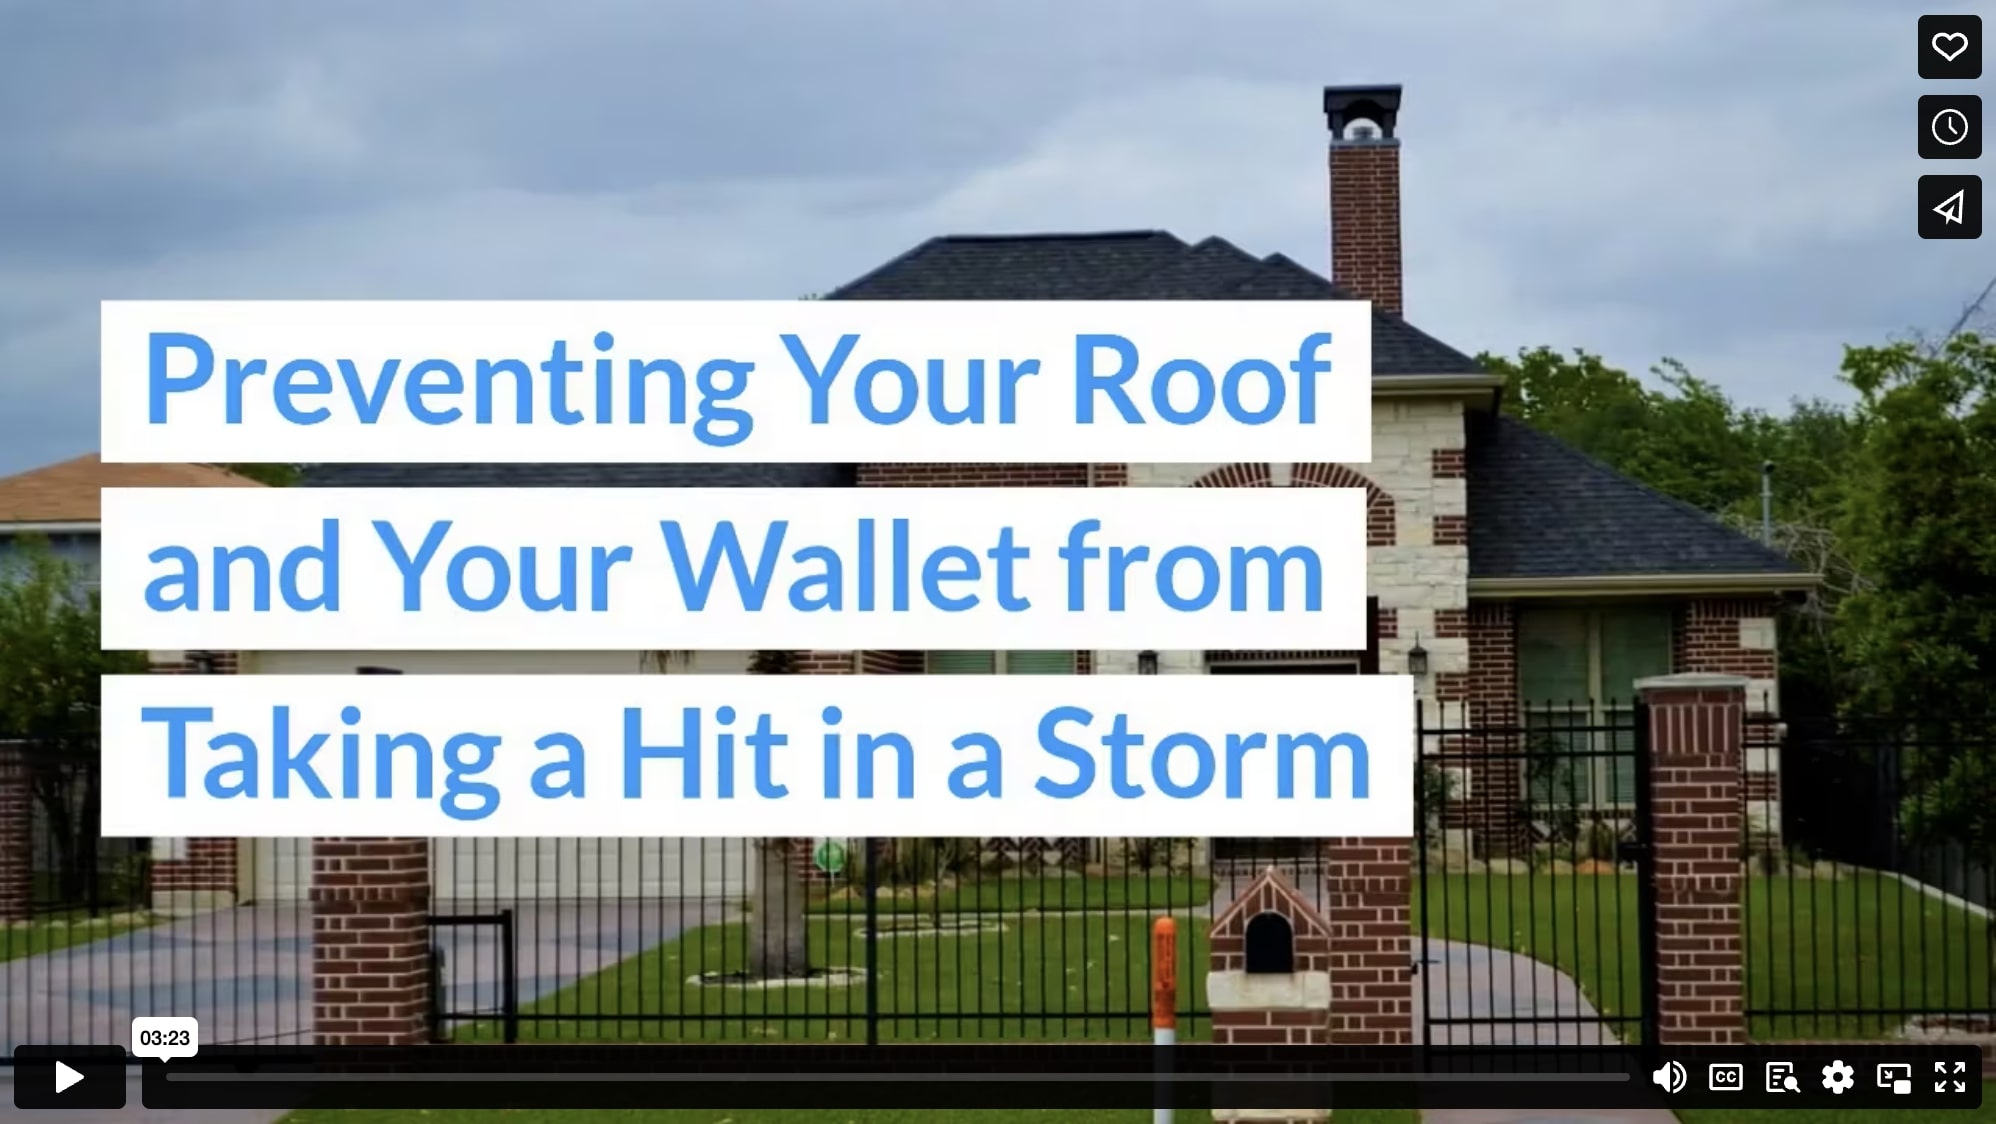 Preventing Your Roof and Your Wallet from Taking a Hit in a Storm